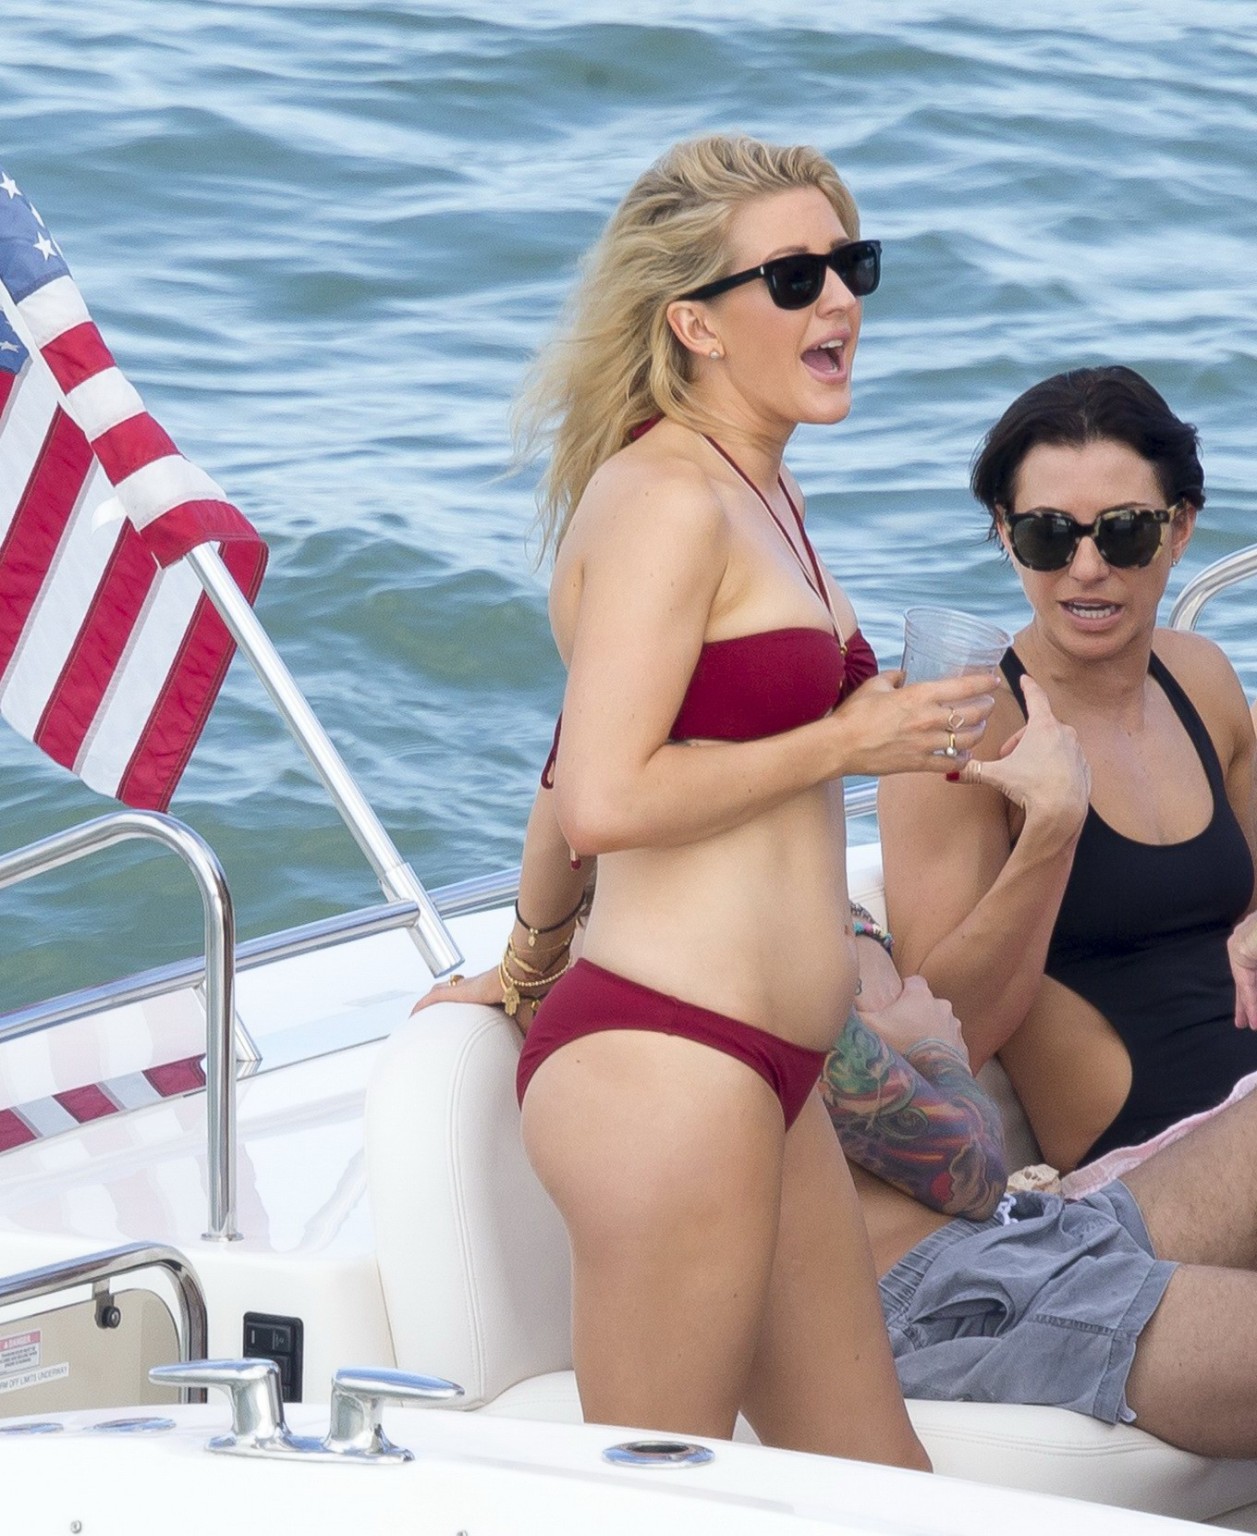 Ellie Goulding showing her ass in skimpy cherry colored bikini at the boat in Mi #75177081